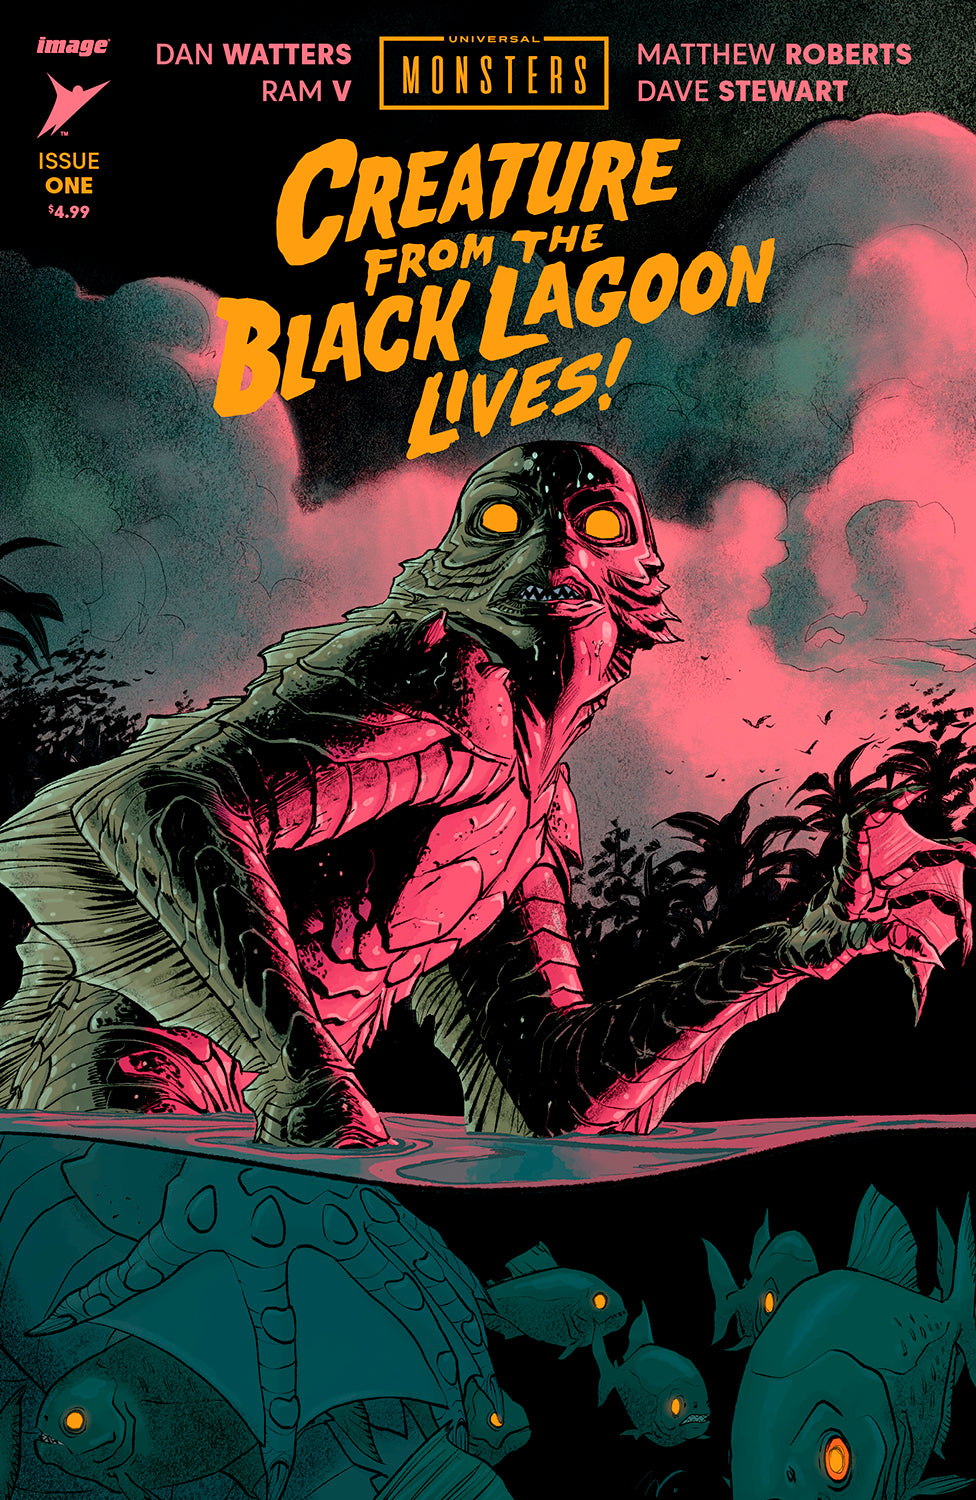 UNIVERSAL MONSTERS THE CREATURE FROM THE BLACK LAGOON LIVES #1 COVER A MATTHEW ROBERTS & DAVE STEWART